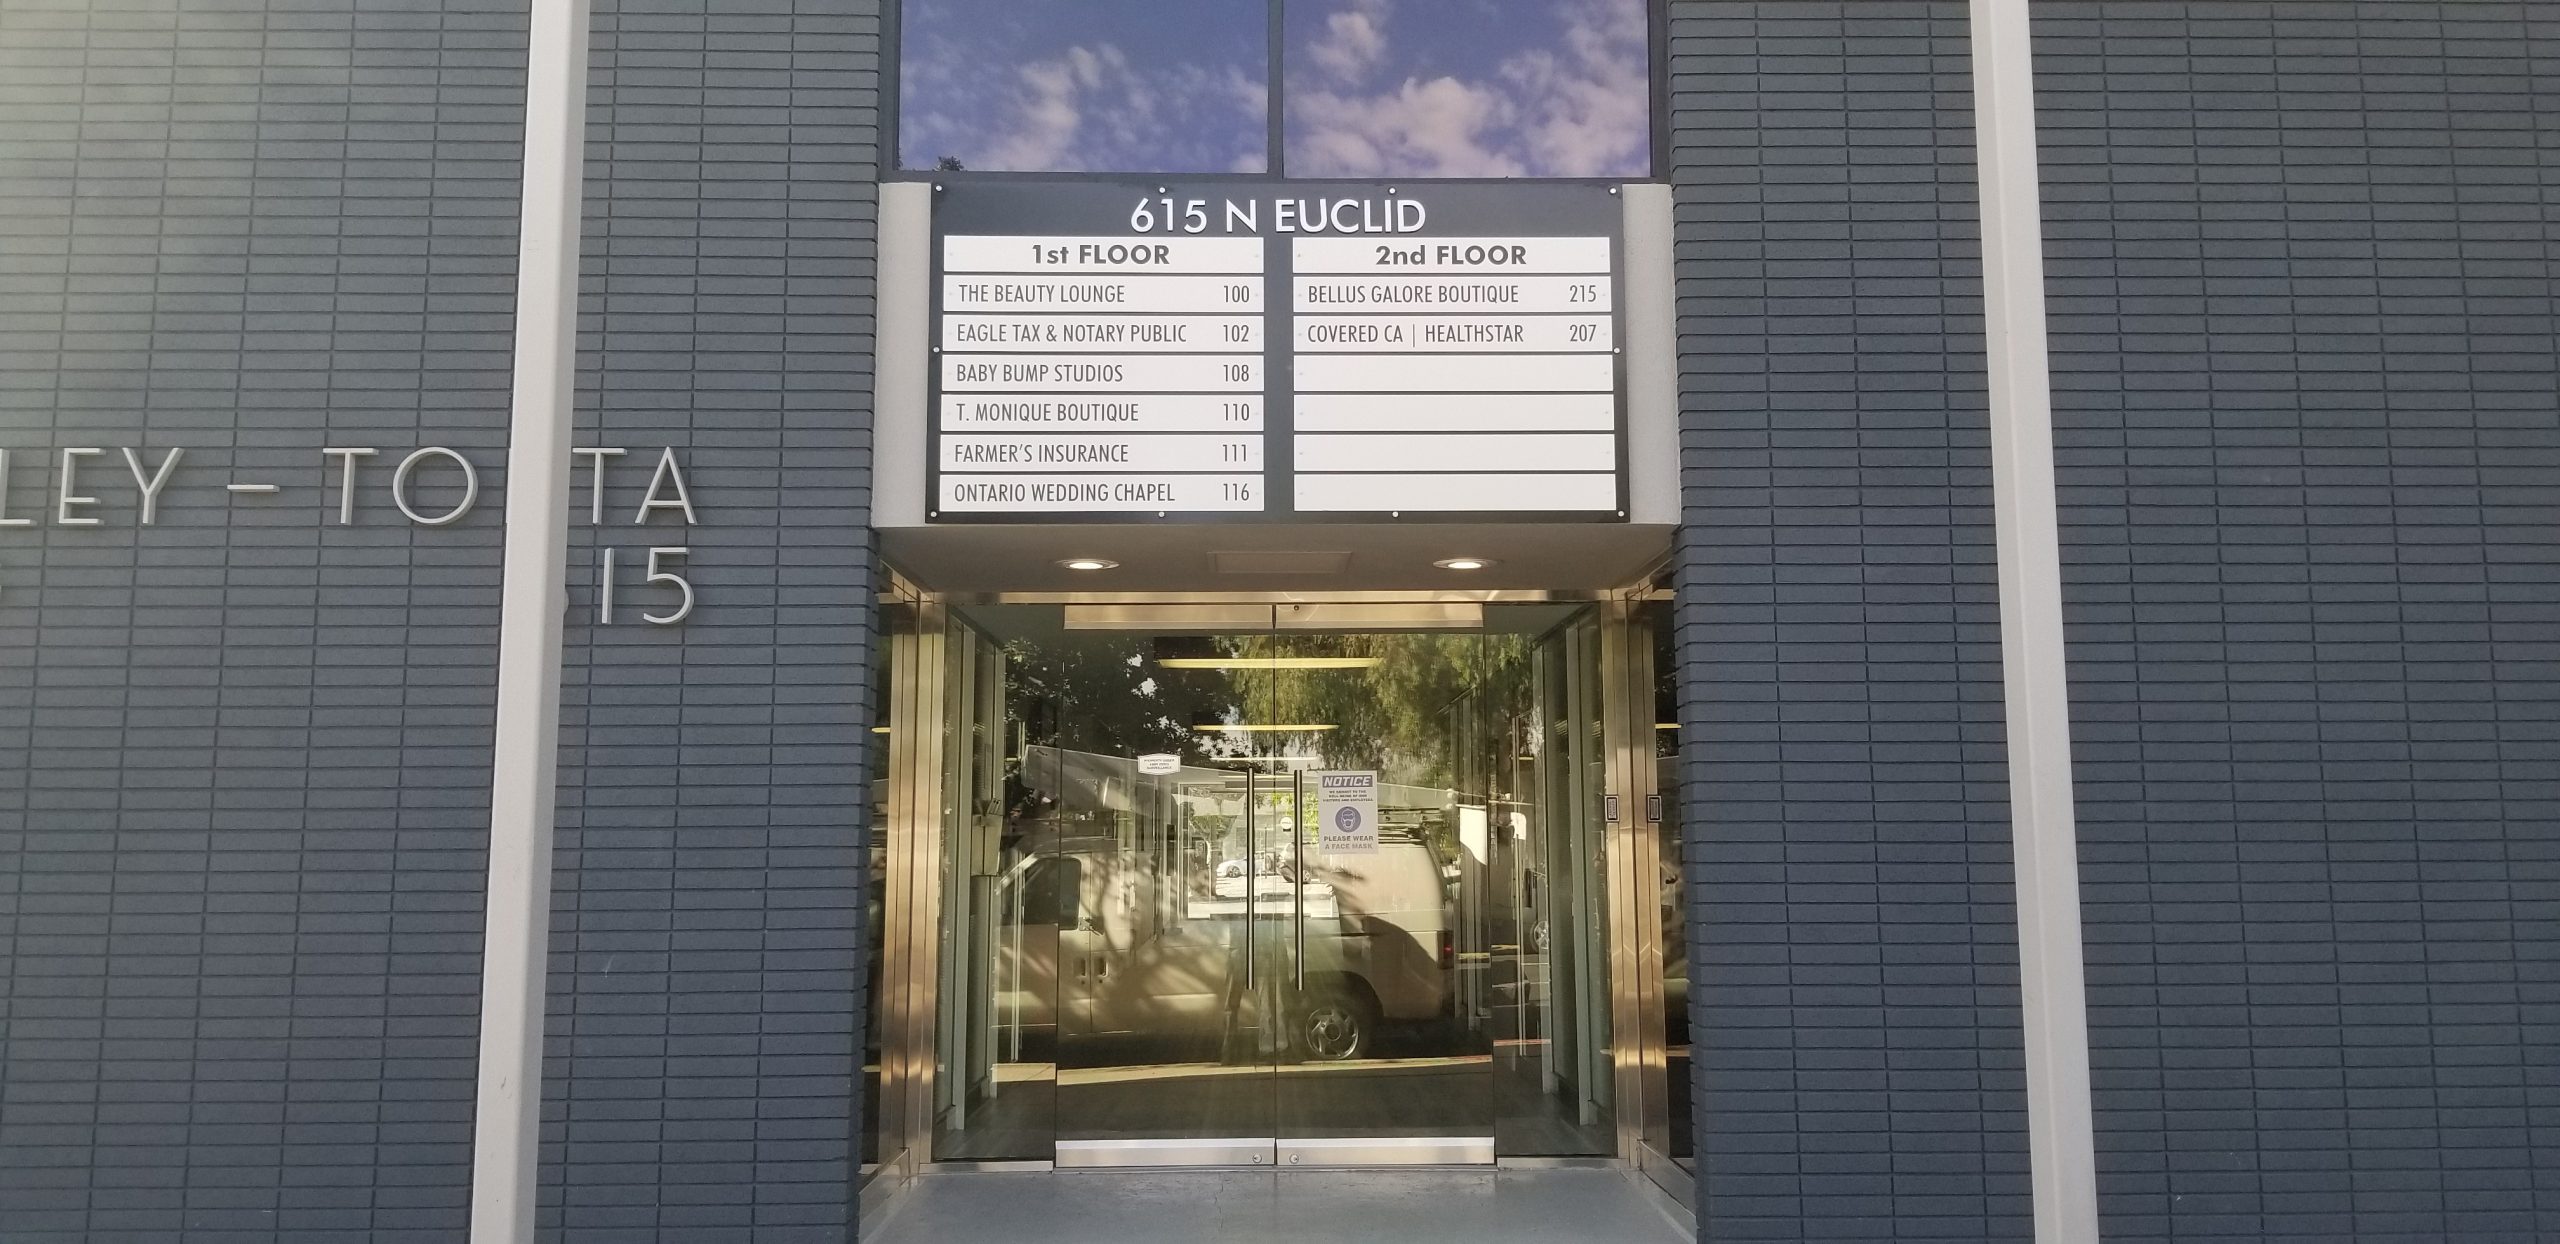 For  615 Euclid in Ontario we fabricated and installed this multitenant directory building sign with changeable tenant inserts.